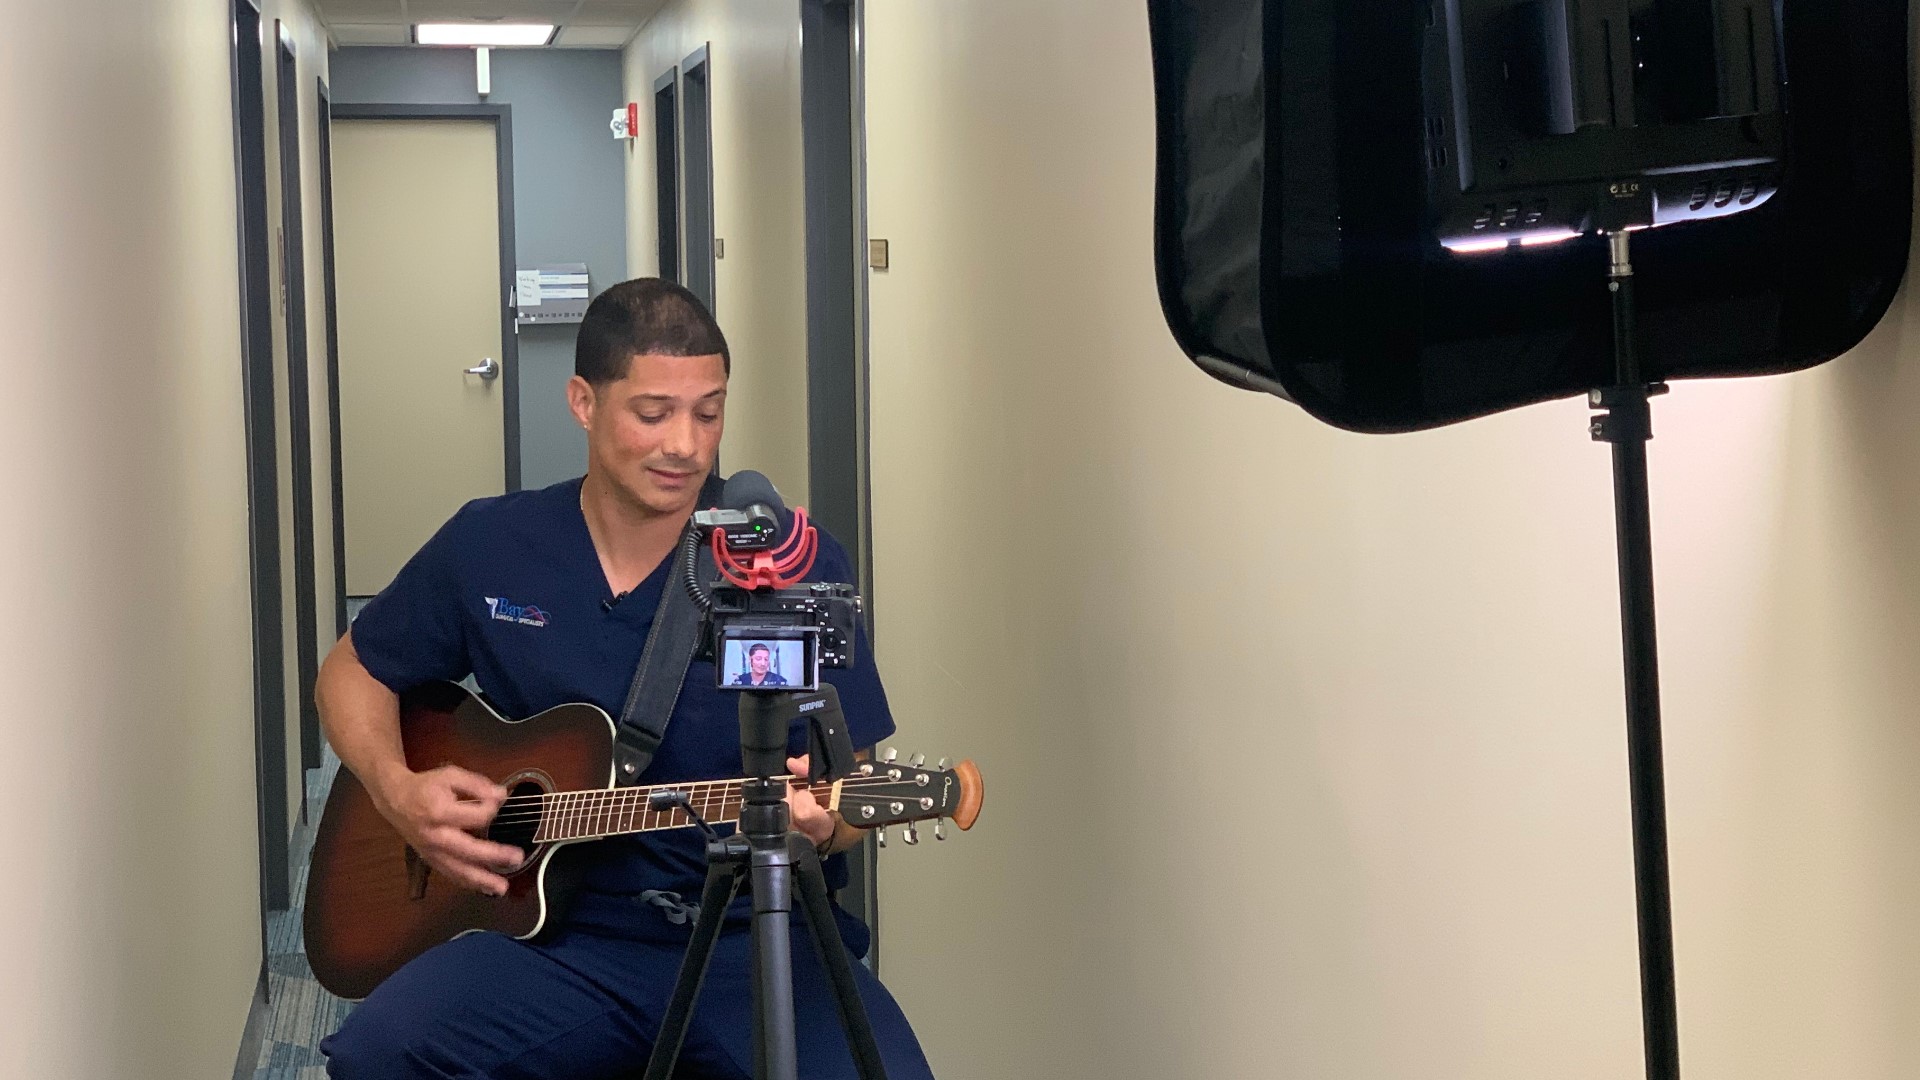 Dr. Jamii St. Julien performed Bill Withers' iconic song from the hallway of St. Anthony's Hospital in downtown St. Petersburg the day after Withers died.